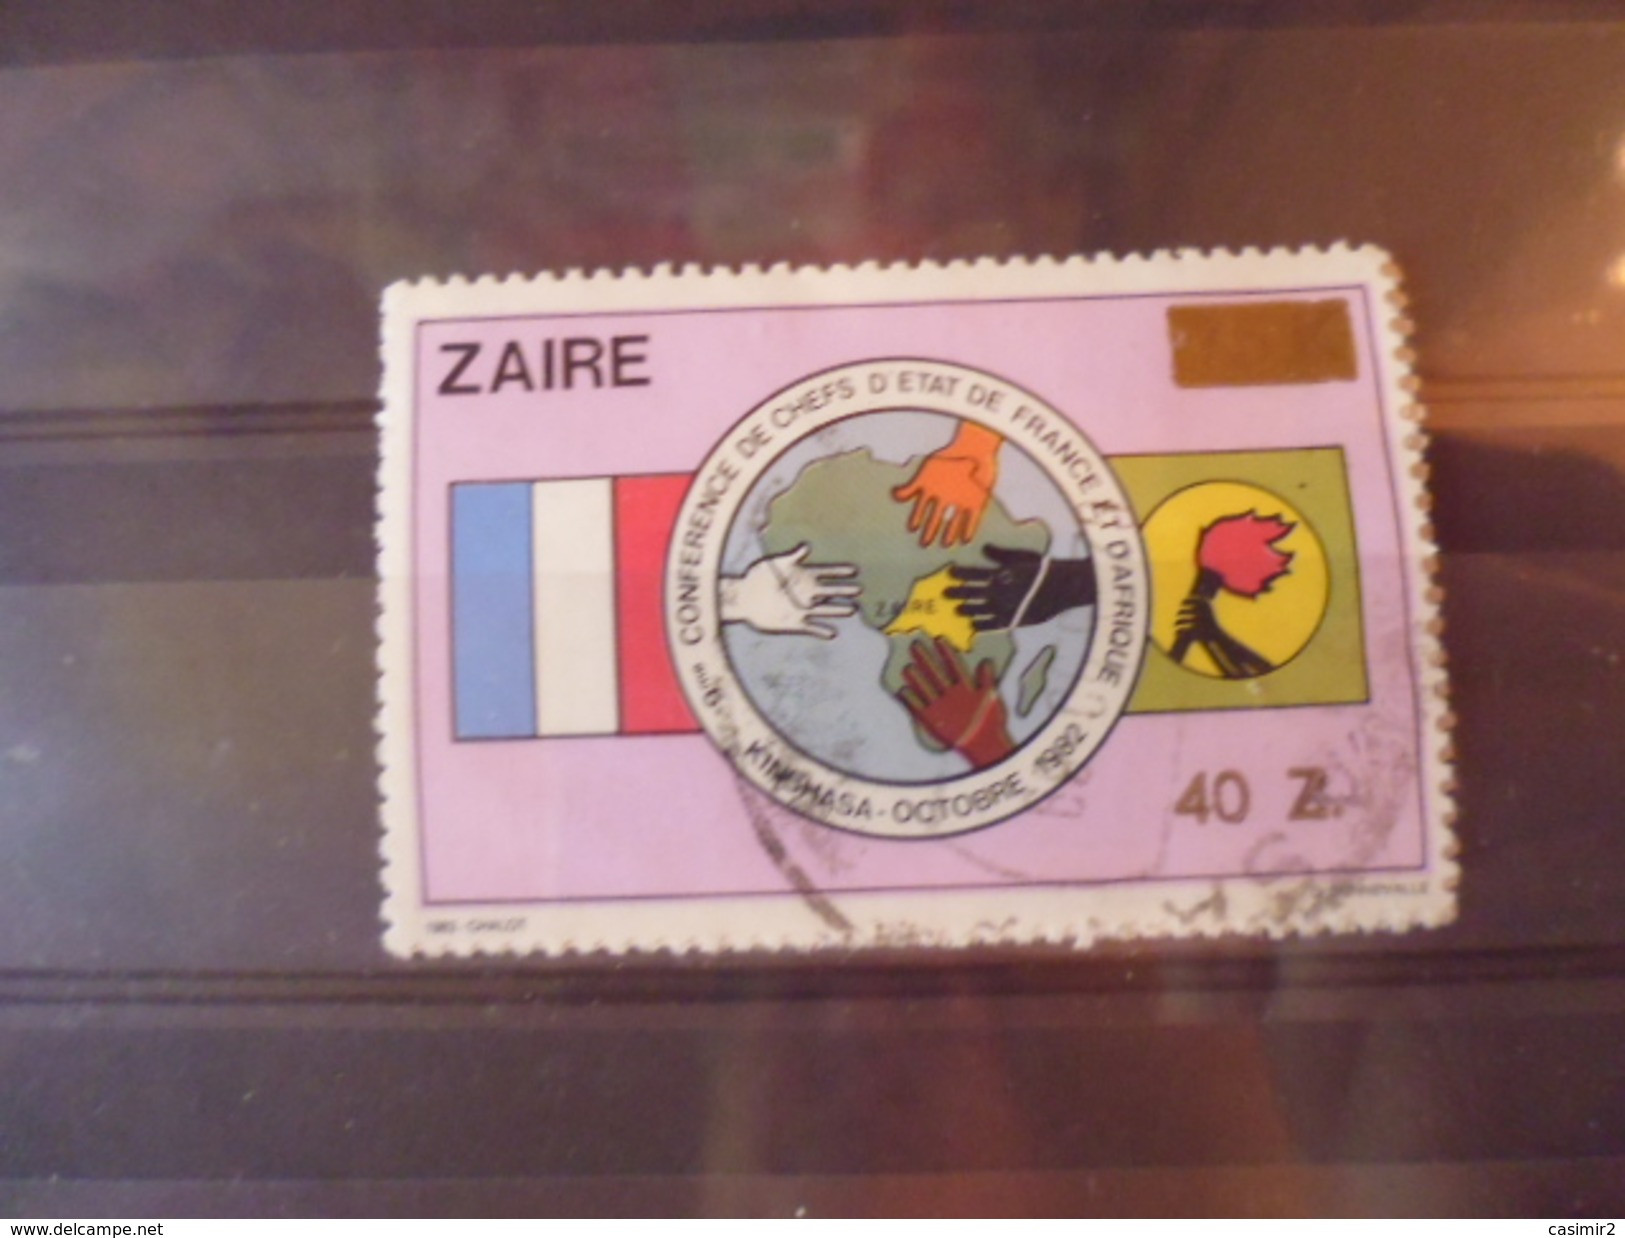 ZAIRE TIMBRE YVERT N°1262 - Used Stamps